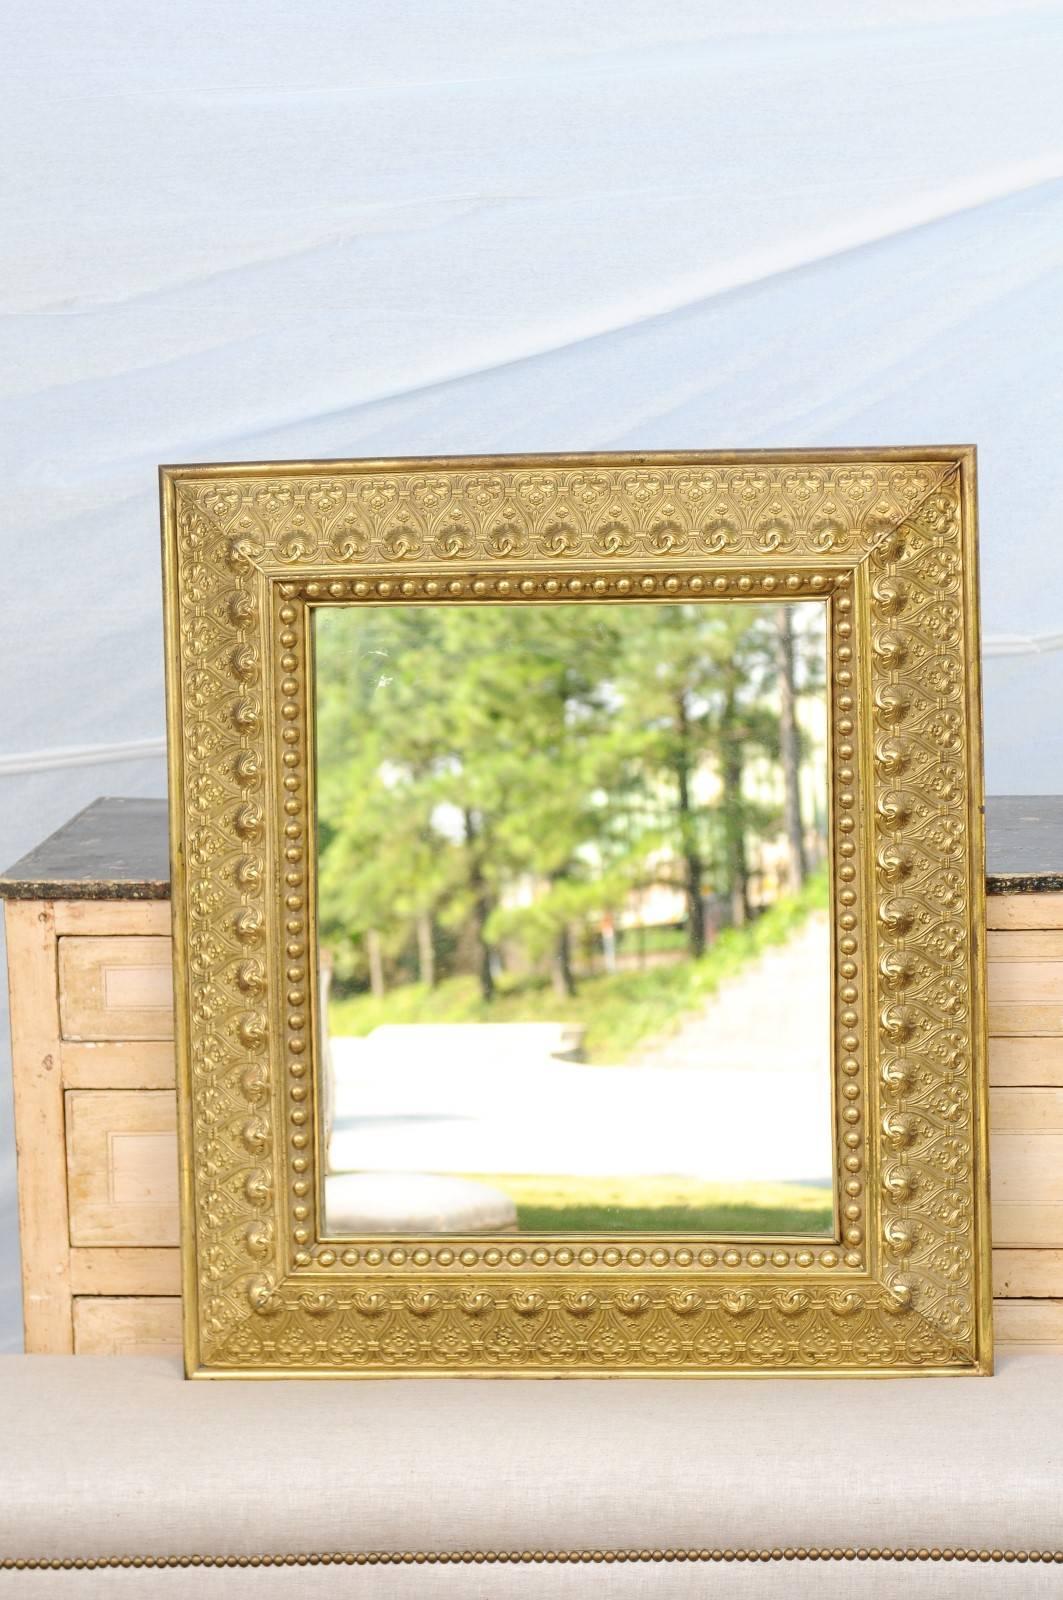 This Dutch gilded mirror from the late 19th century features an exquisite bevelled repoussé brass frame. The wonderful frame is made of a rhythmic repetition of floral motifs delicately protected by intertwined volutes shaping a succession of